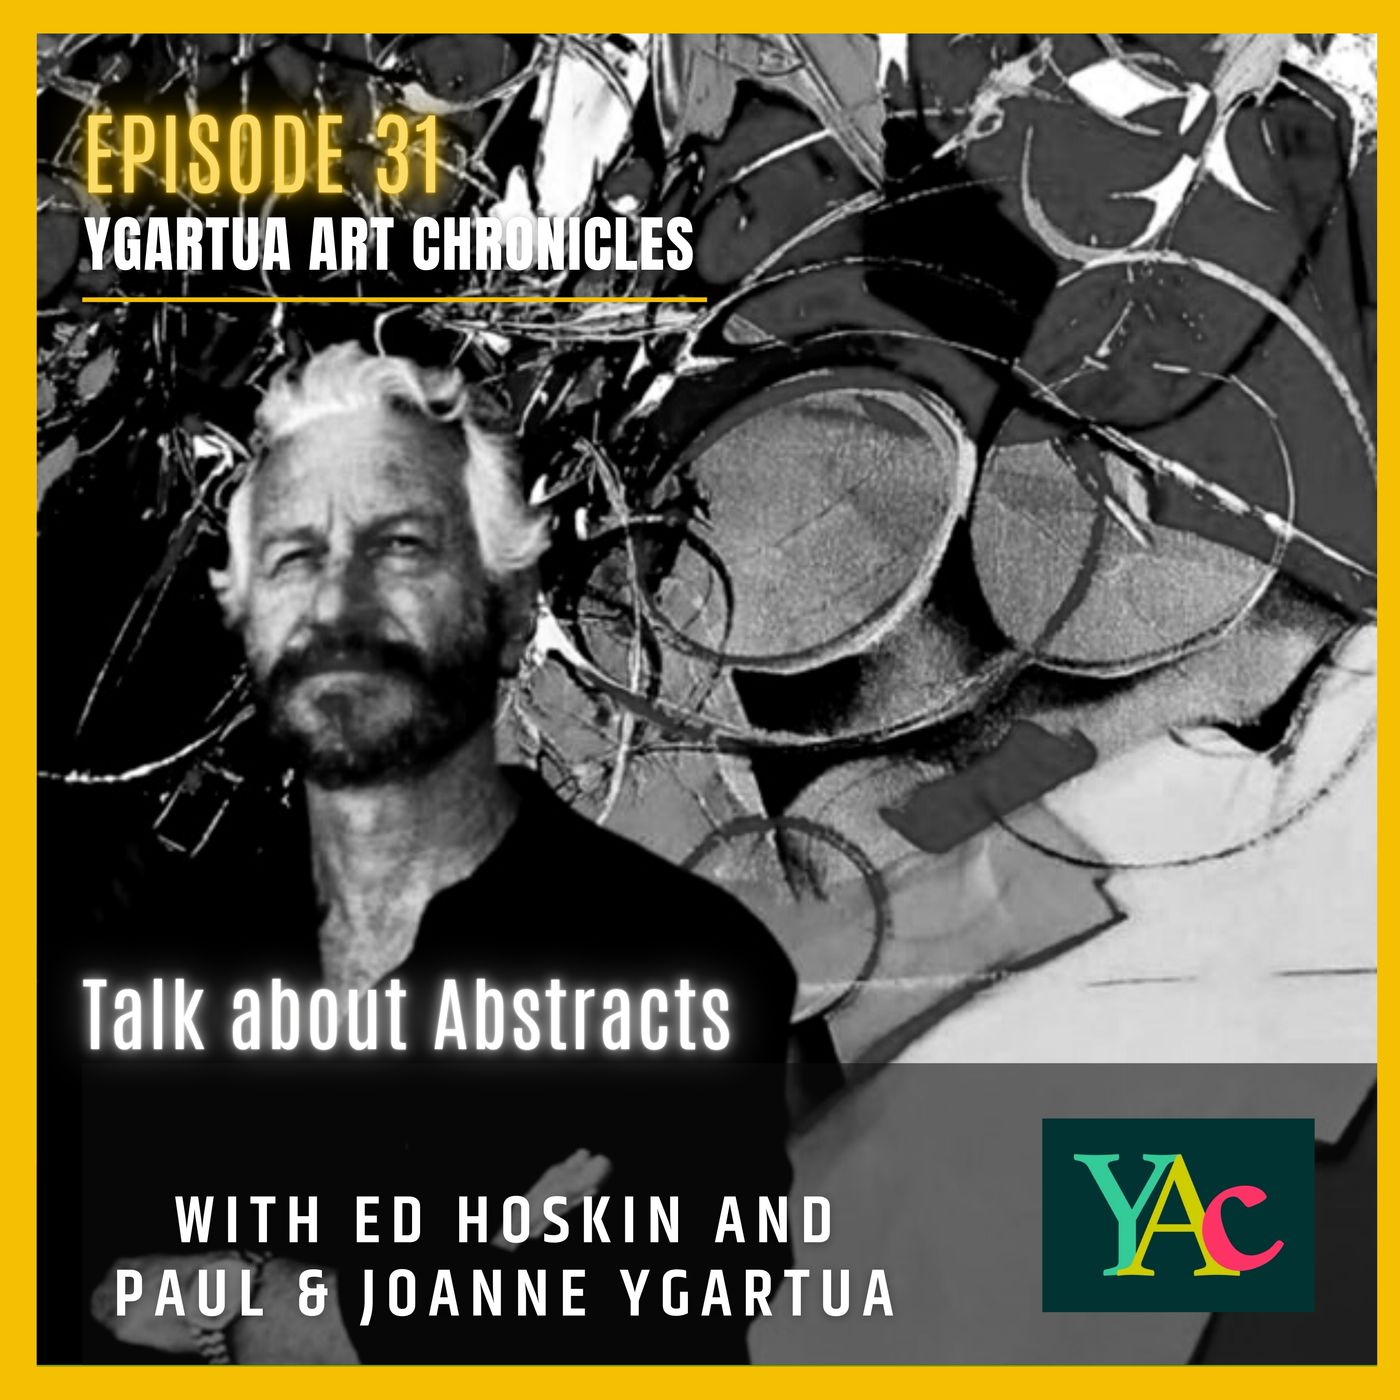 Episode 31: Talk about Abstracts